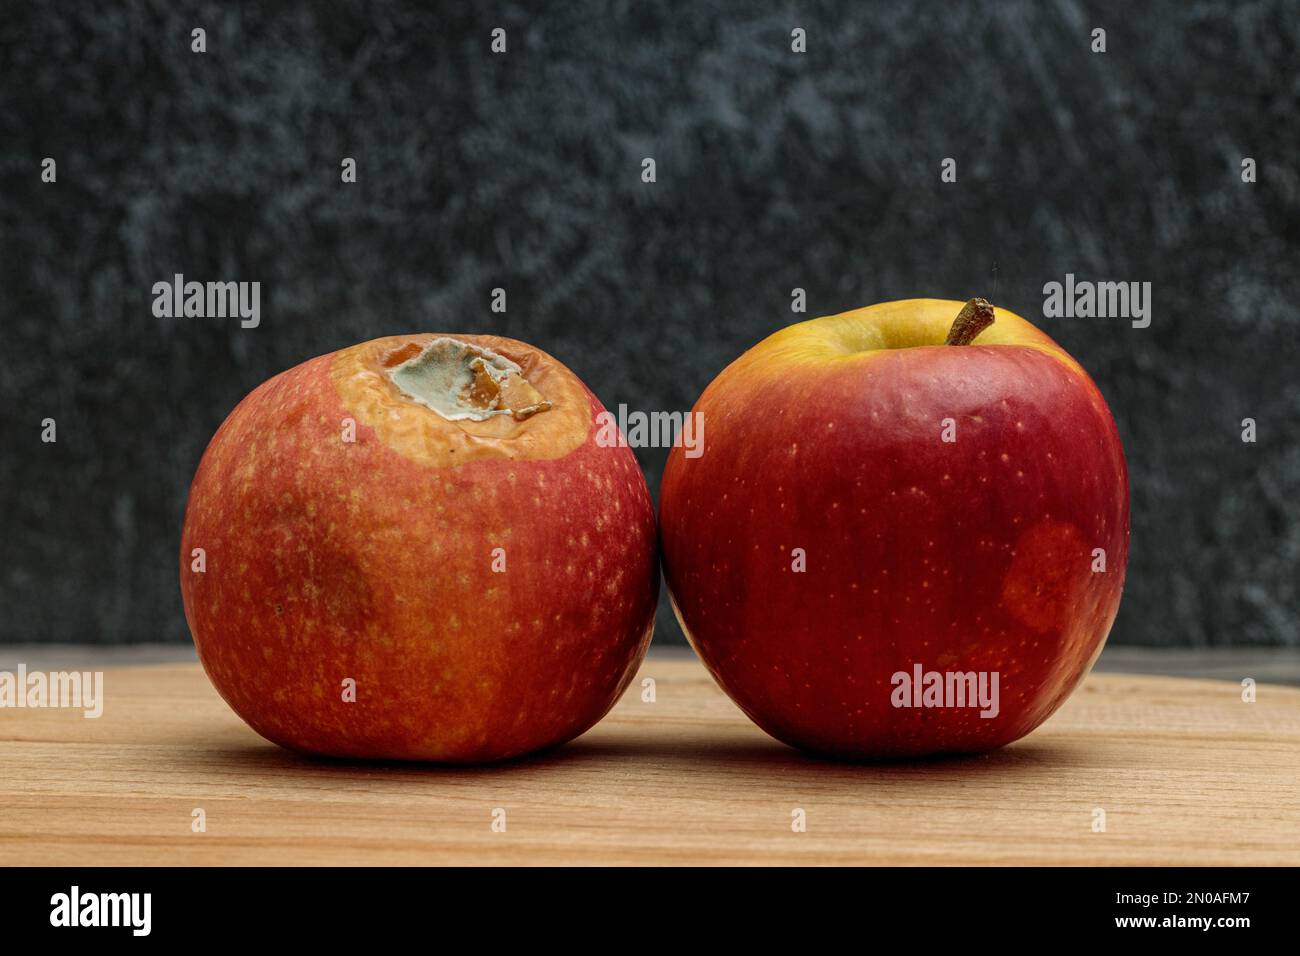 A rotten apple with mold and a fresh apple on a dark background Stock Photo